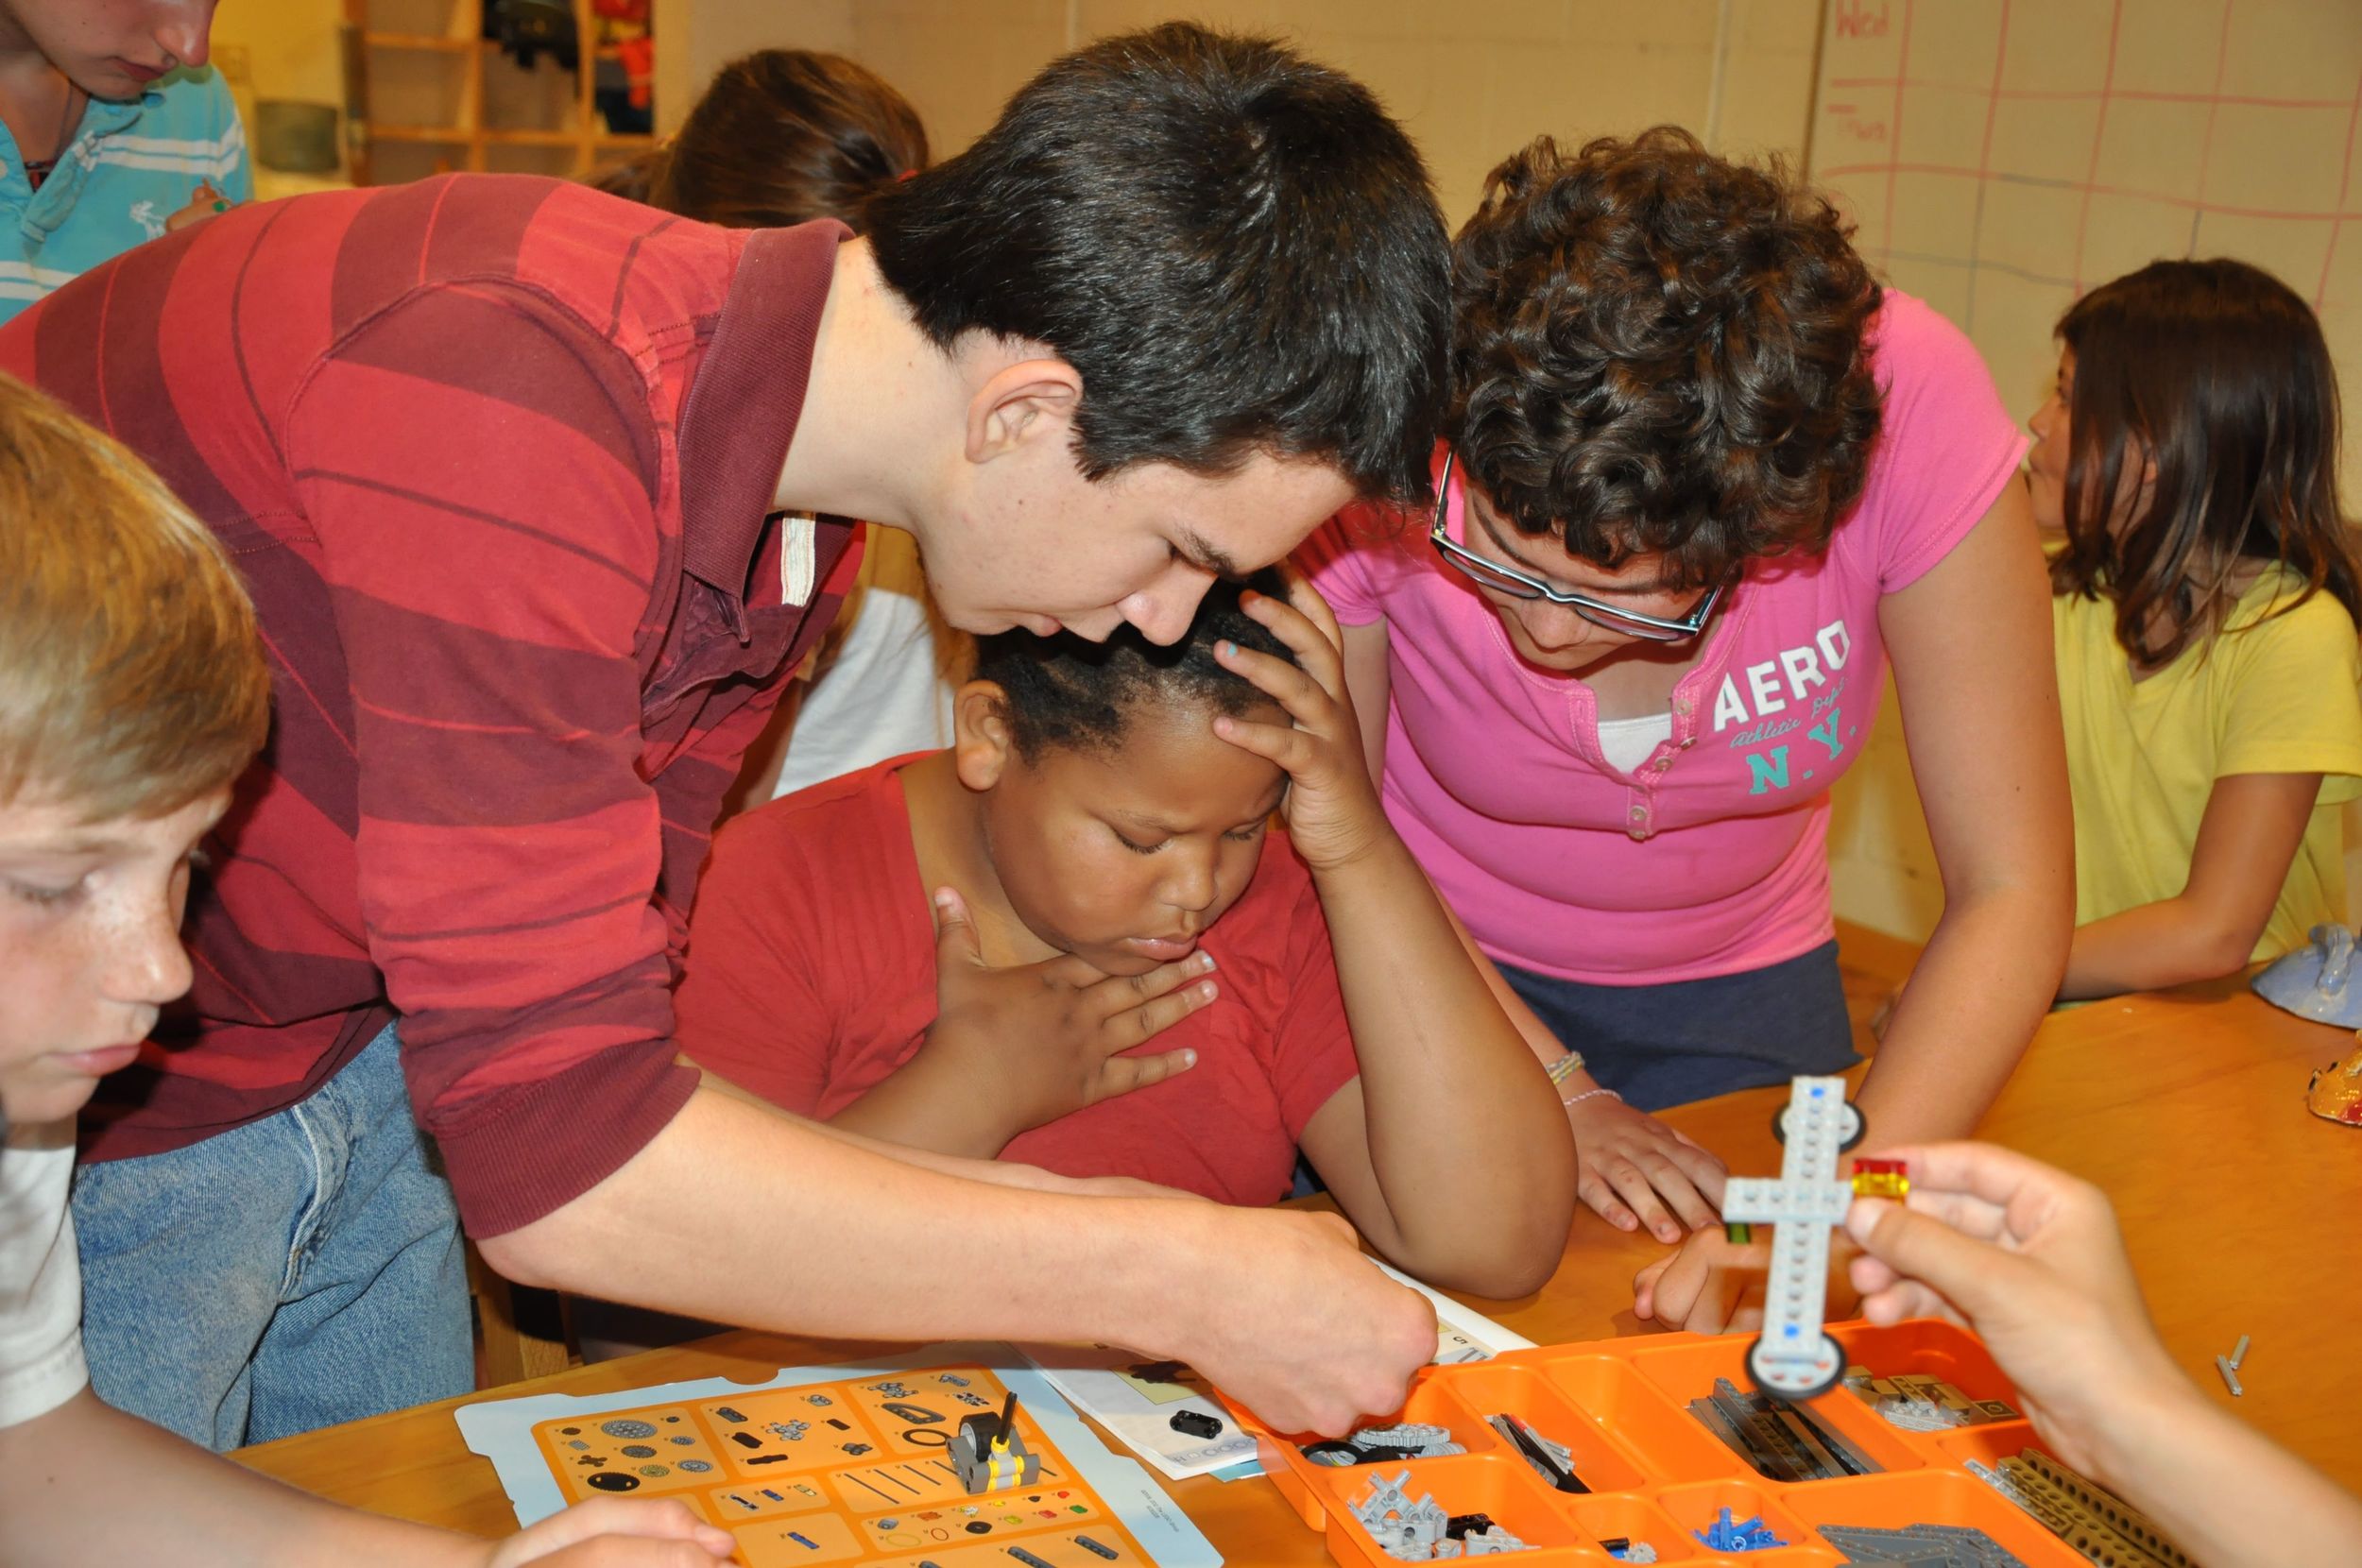 this-week-we-had-a-teenager-from-mitchell-county-teach-the-kids-about-robotics.jpg